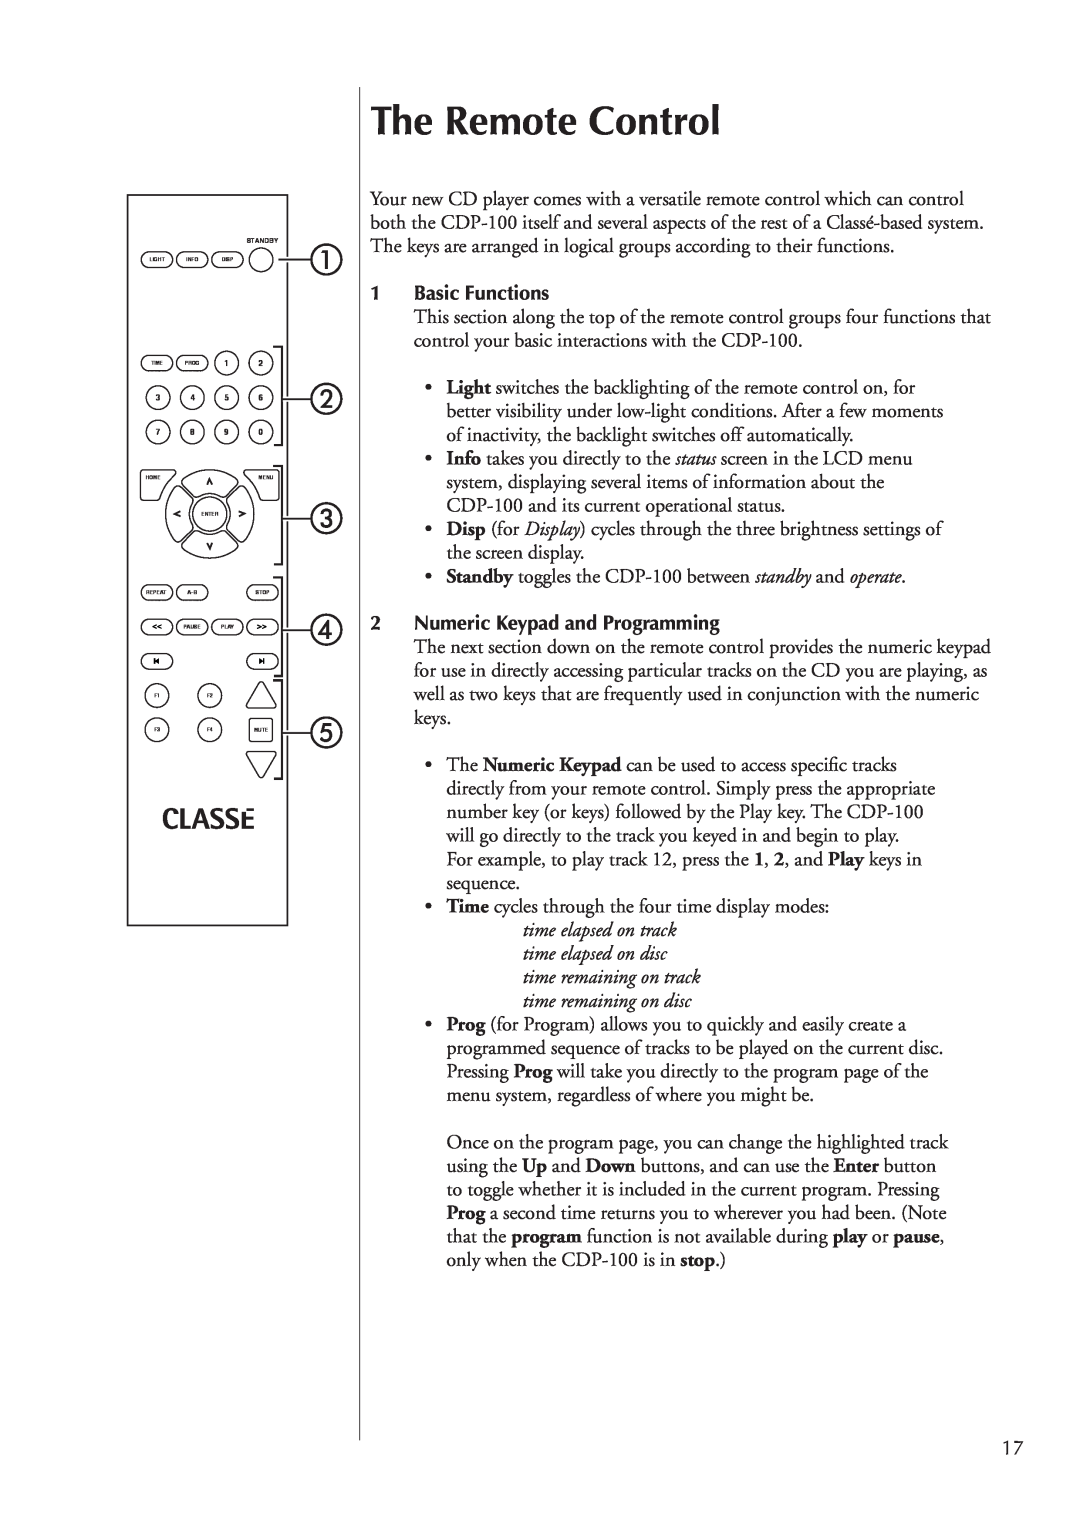 Classe Audio CDP-100 owner manual The Remote Control, 1Basic Functions, 2Numeric Keypad and Programming 